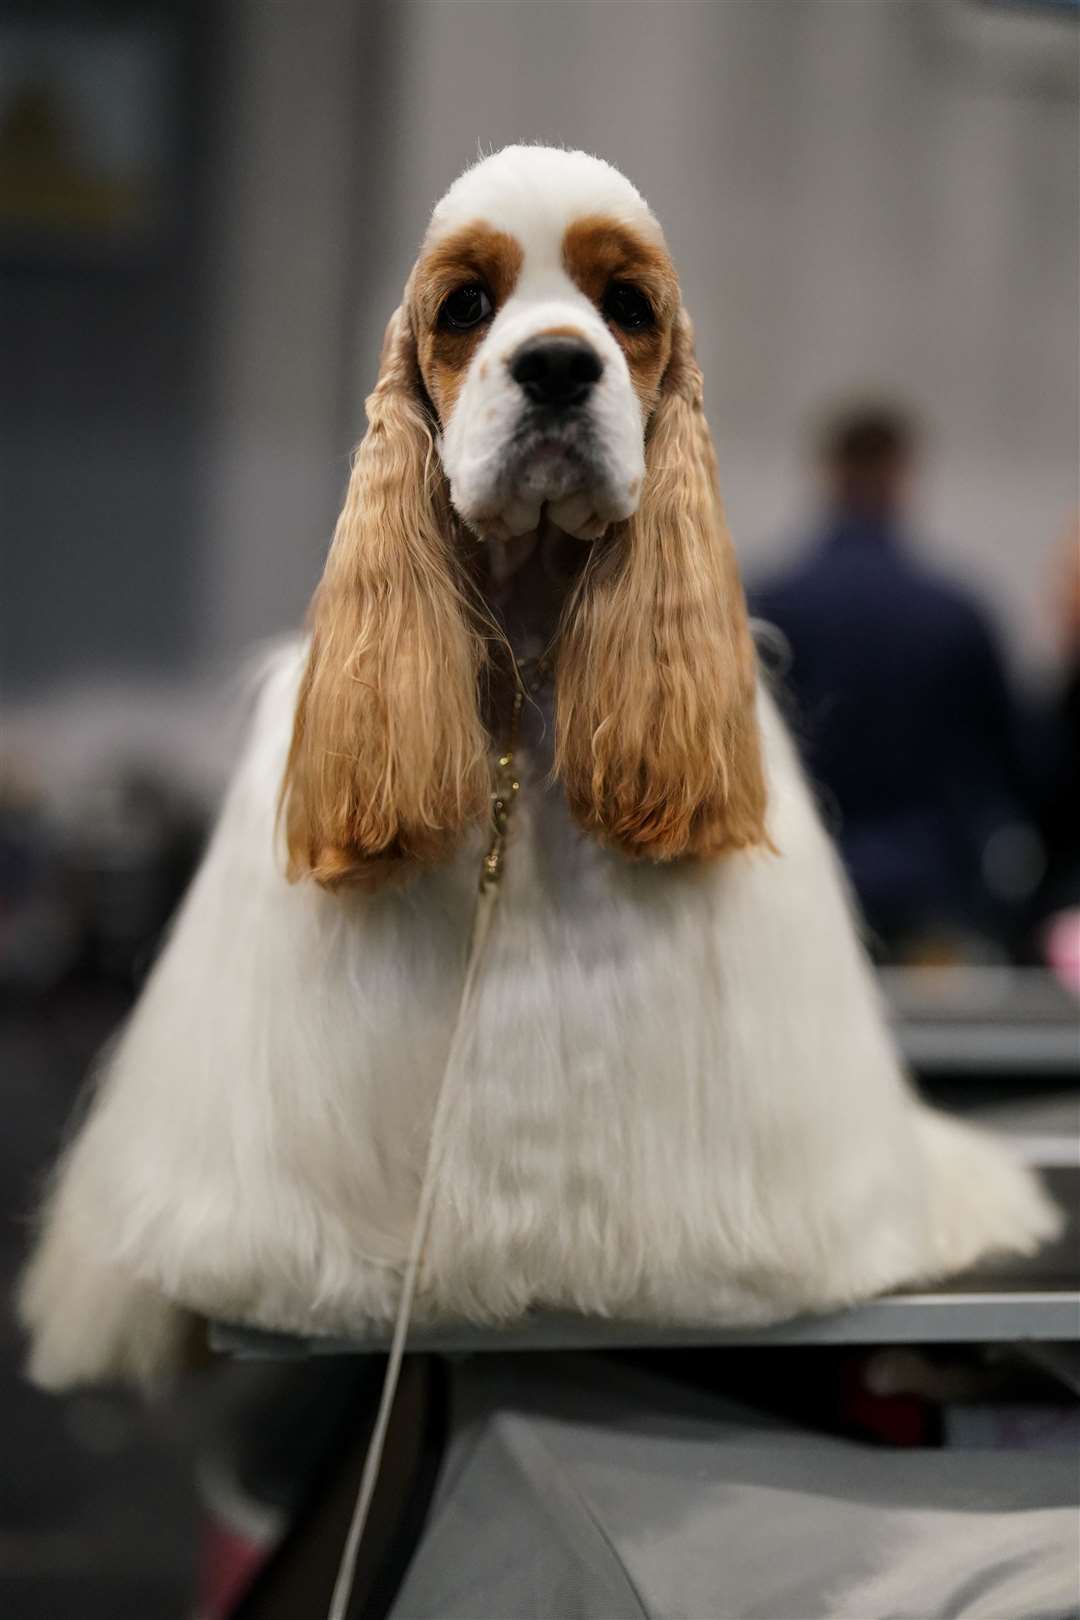 An American cocker spaniel has a moment of calm before entering the show ring (Jacob King/PA)